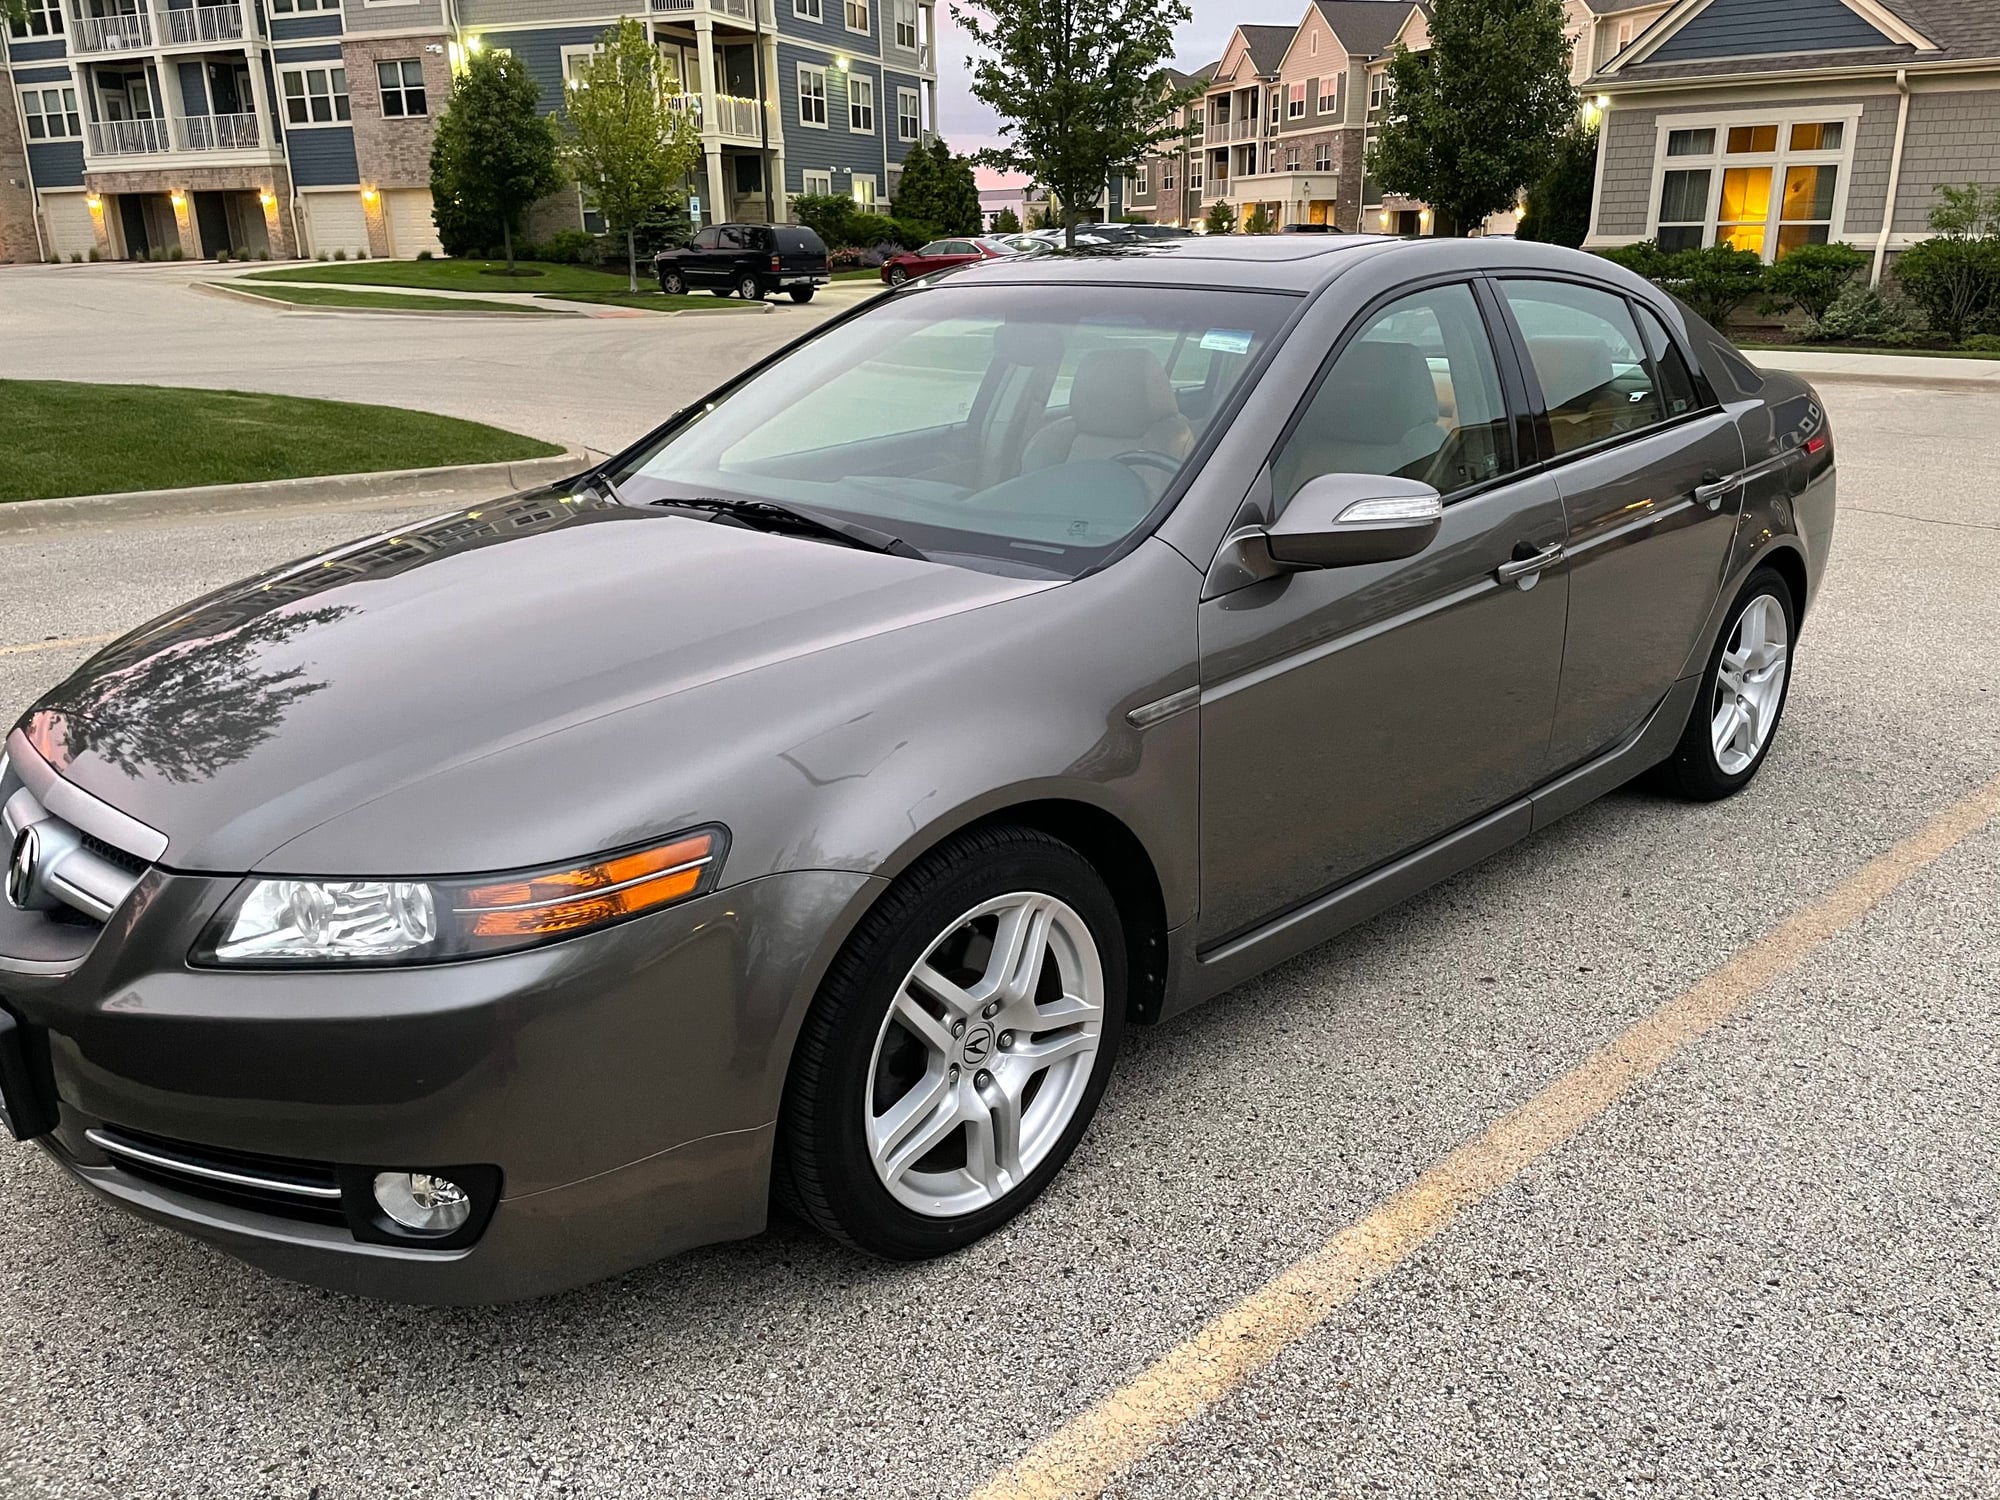 2008 Acura TL - FOR SALE: 2008 Acura TL, low miles, single owner, well cared for - Used - VIN 19UUA66268A051472 - 118,000 Miles - 6 cyl - 2WD - Automatic - Sedan - Gray - Vernon Hills, IL 60061, United States